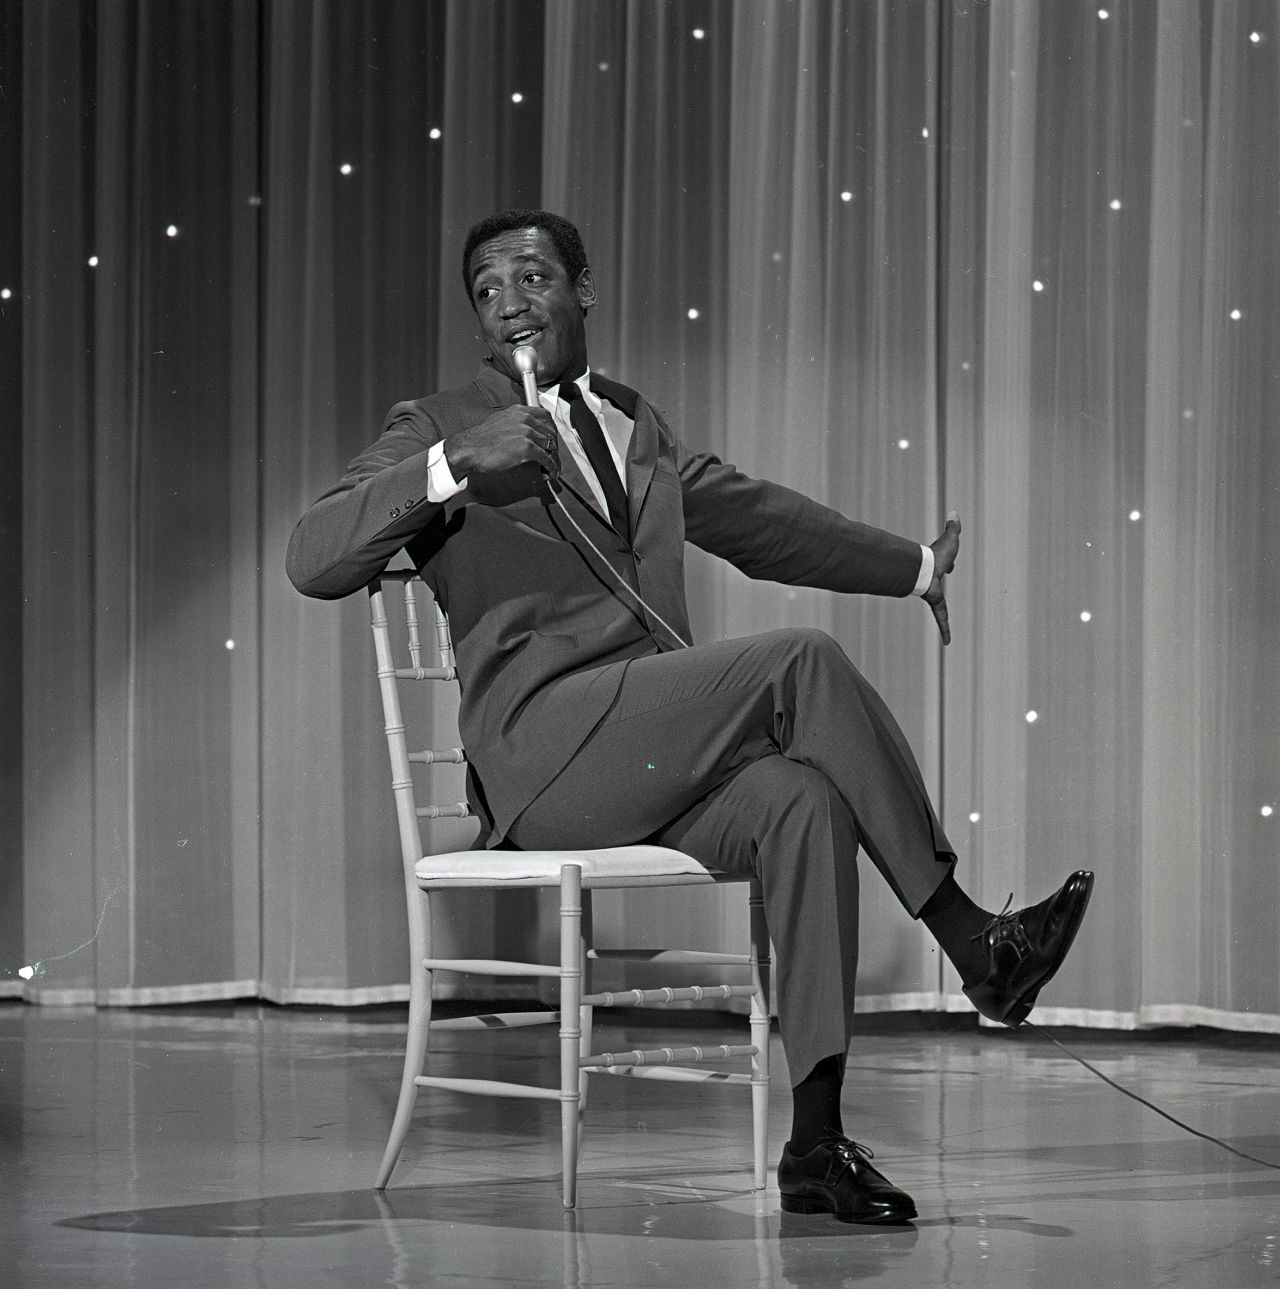 Cosby, shown here in 1965, began his career in New York nightclubs as a standup comedian. His clean-cut style became a career mainstay.